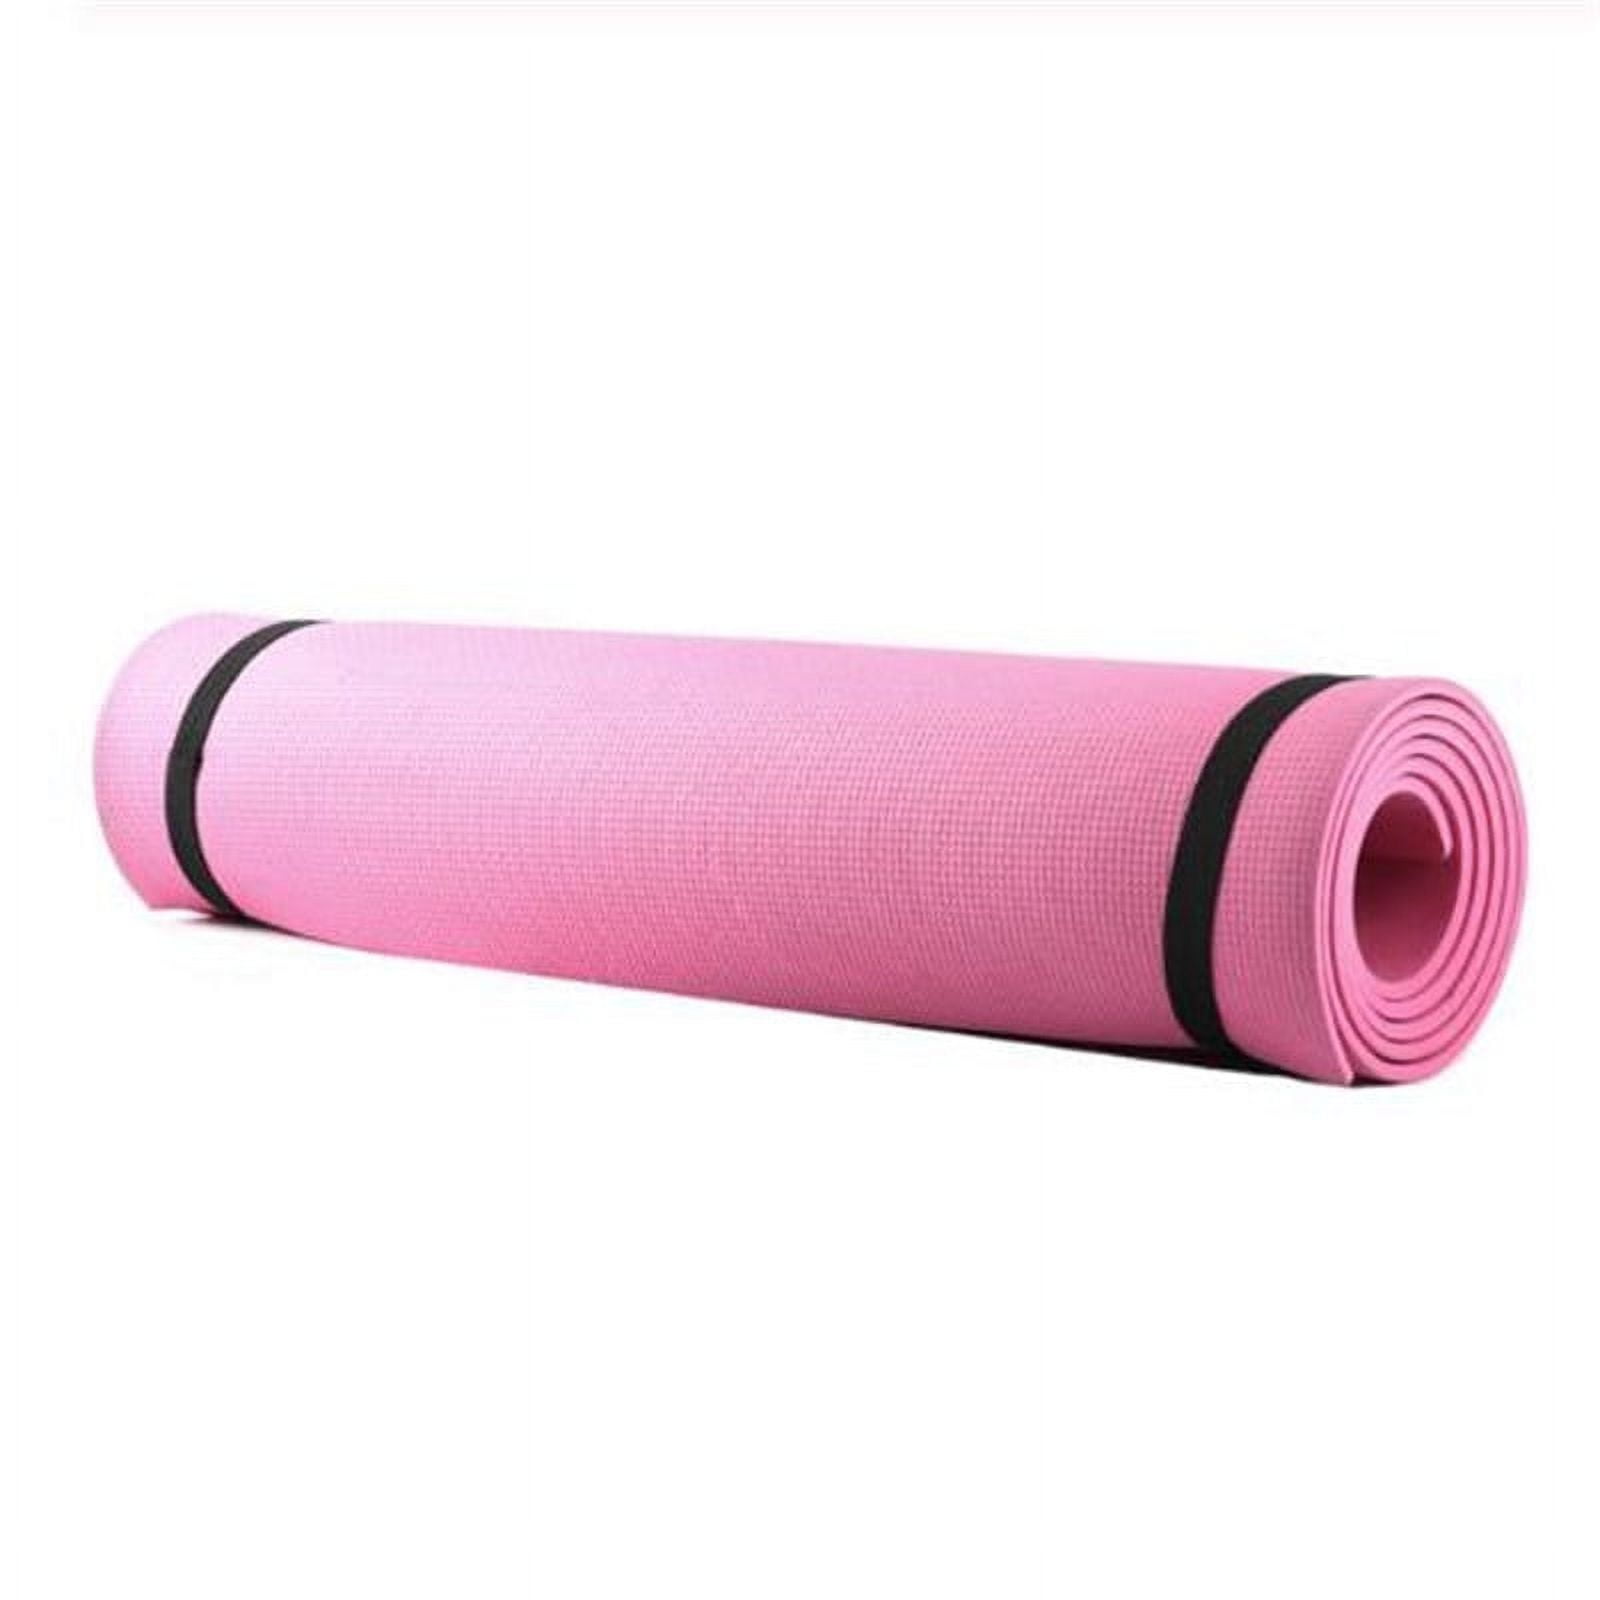 Hemingweigh Yoga Mat Thick, 1 Thick, Non-Slip Exercise Mat for